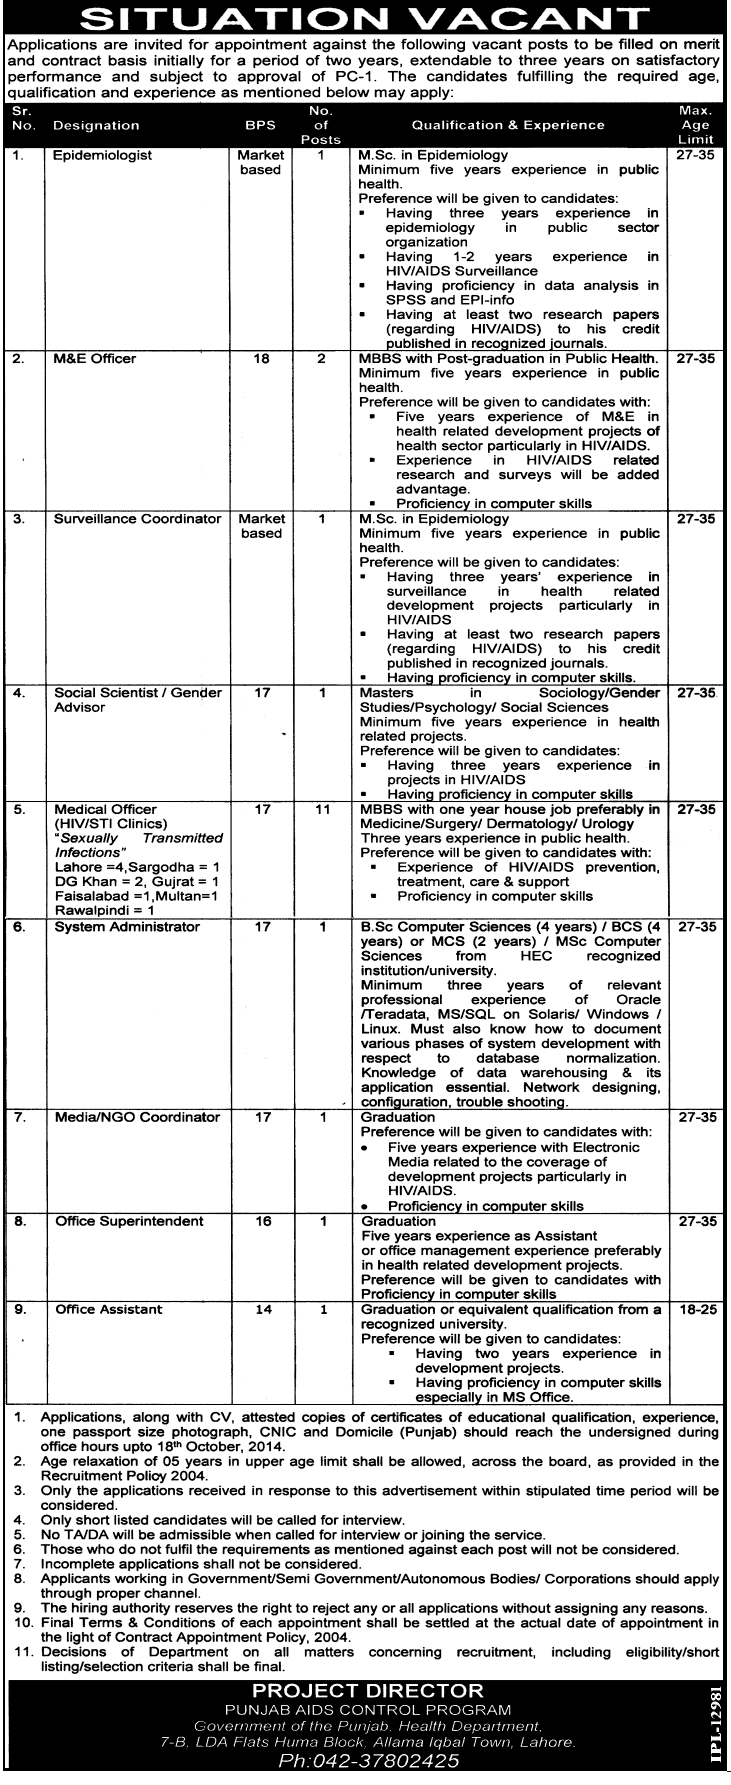 Medical Officers (HIV/STI Clinics), M&E Officer Jobs in Punjab AIDS Control Program (PACP) Lahore